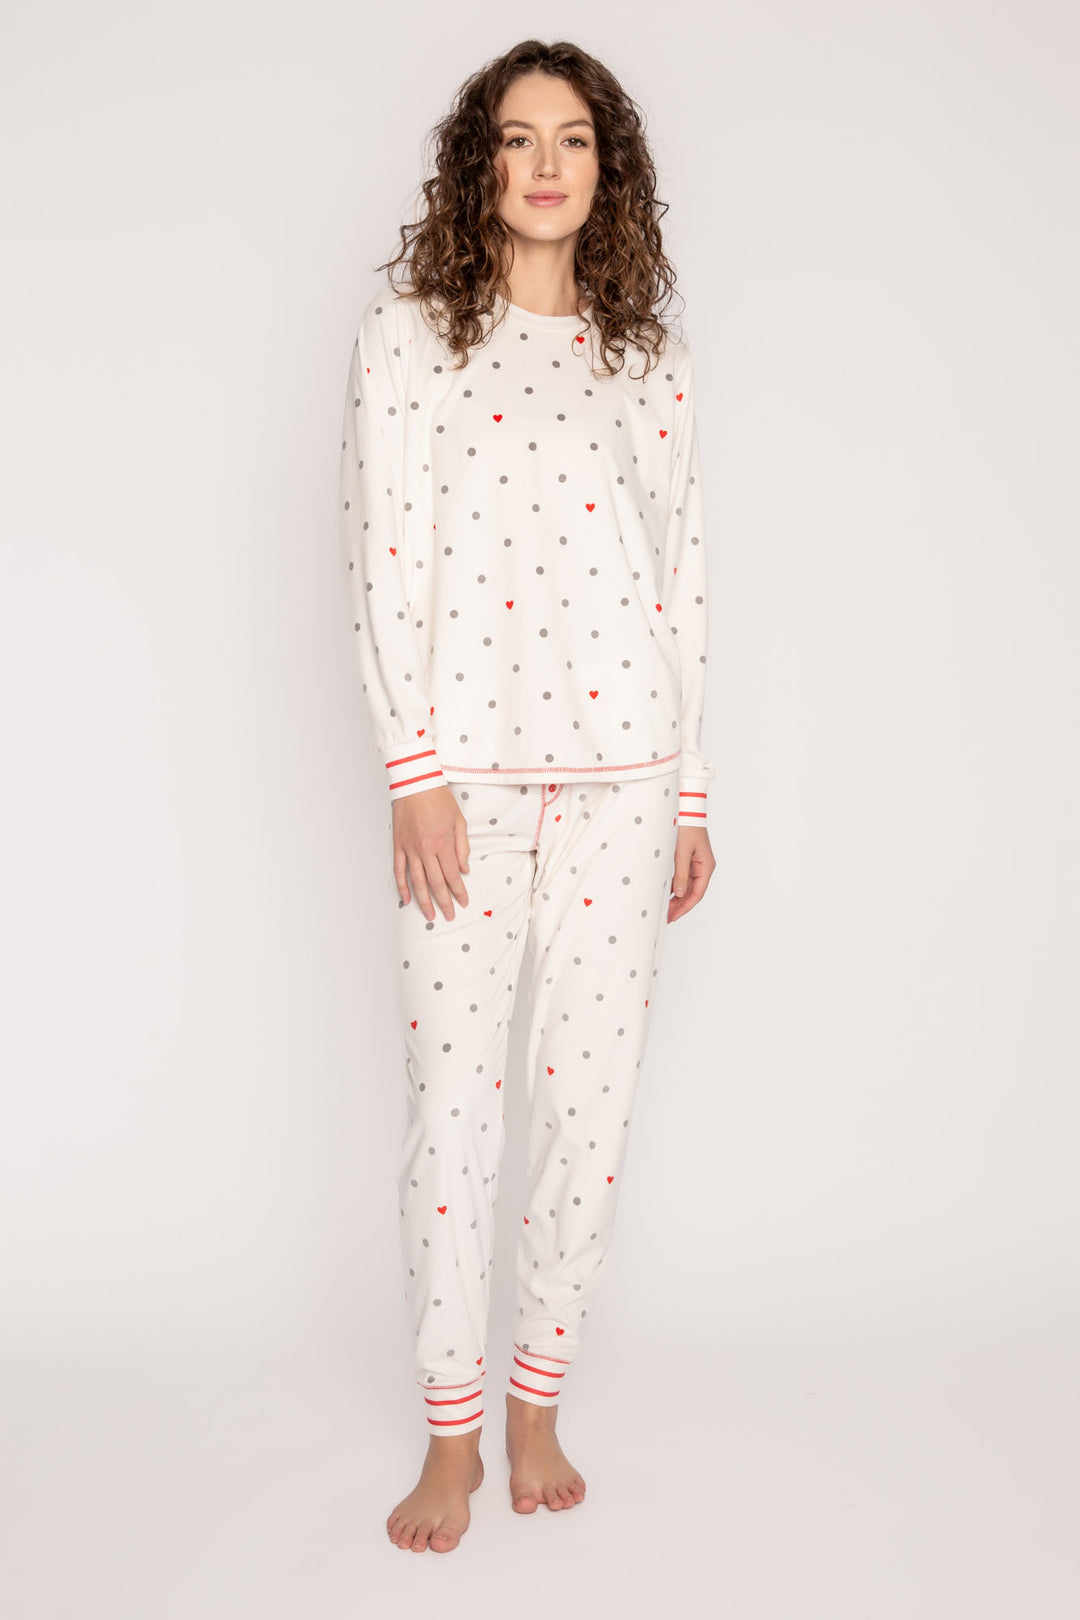 Silky velour knit pj set top & pant in ivory grey-red dot pattern. Red stitching & stripe cuffs. (7257678381156)